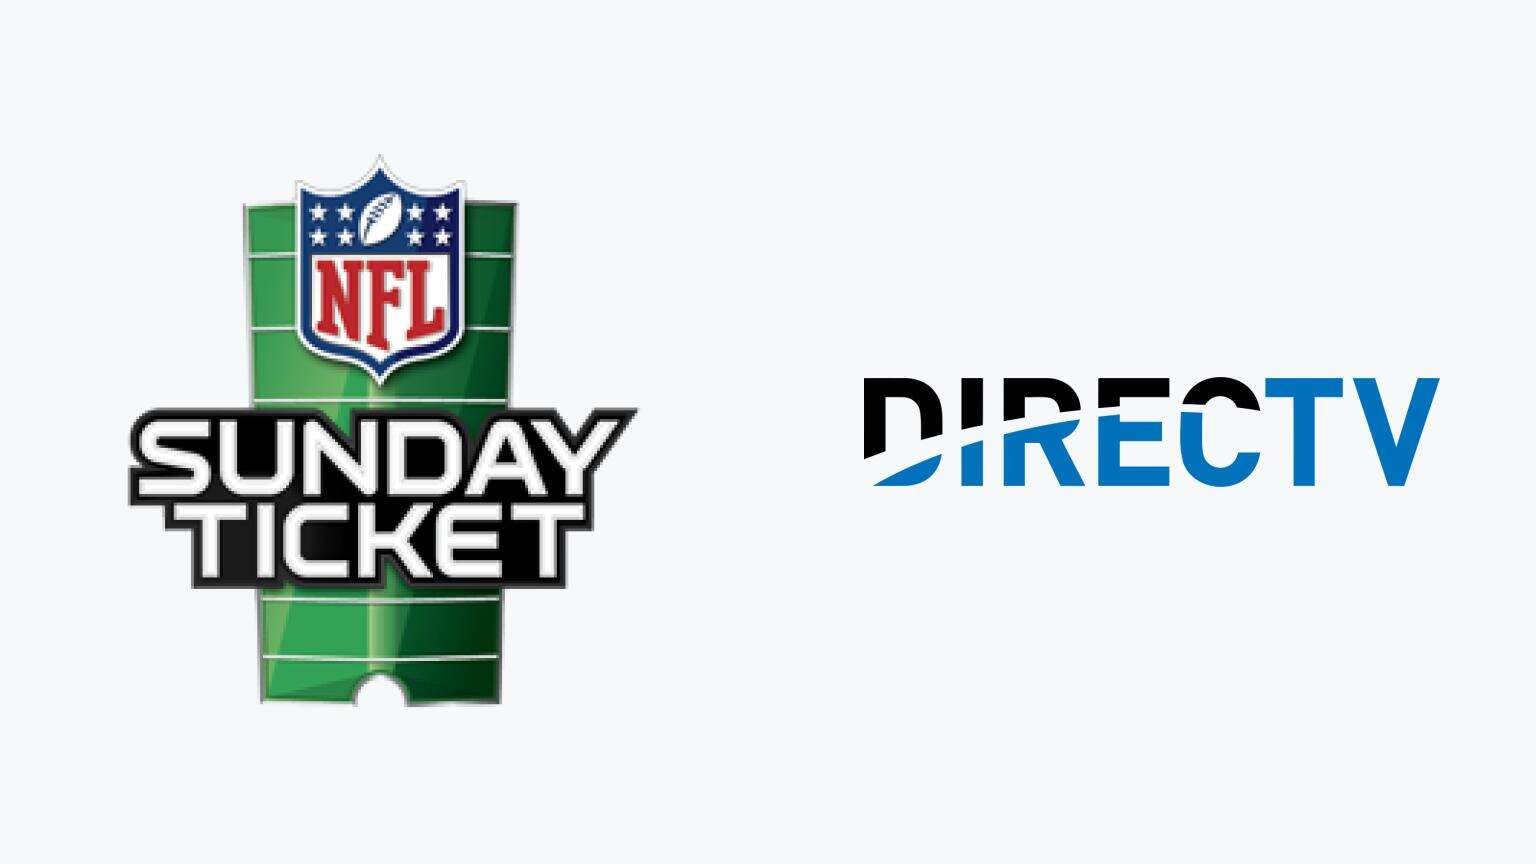 DIRECTV to Reimburse Subscribers For Sunday Ticket Streaming Issues